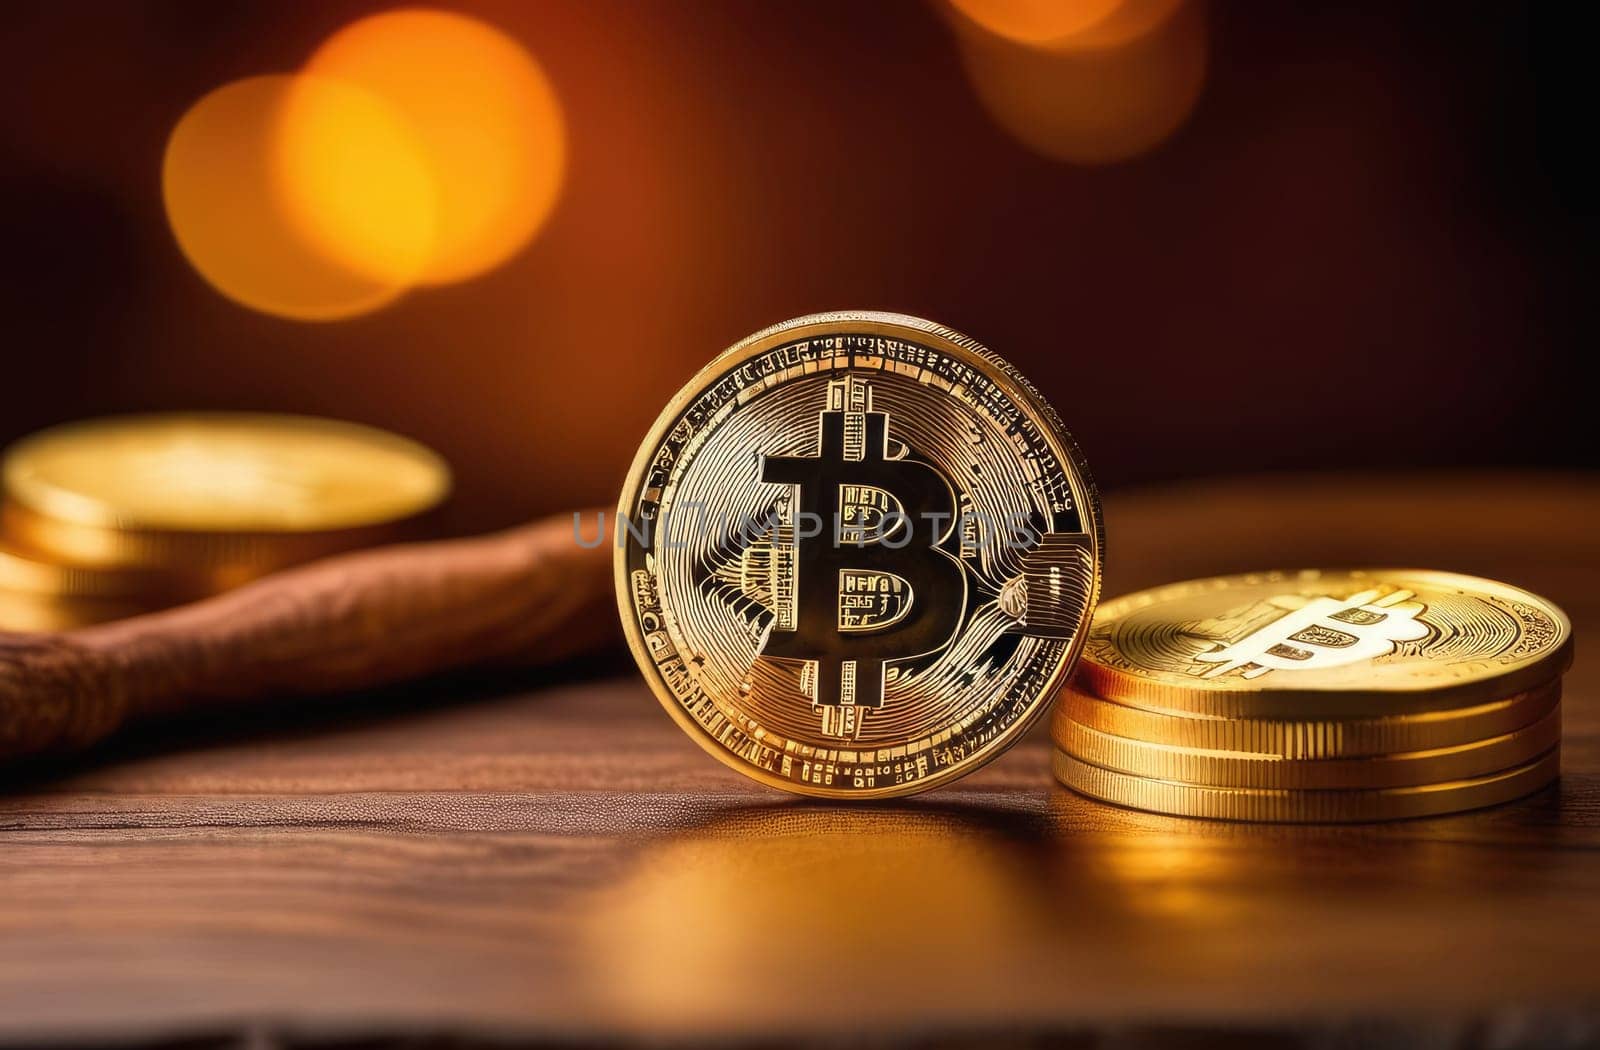 Golden shiny bitcoin coins close-up on a wooden table. Dark background. Payment system concept. Bokeh.